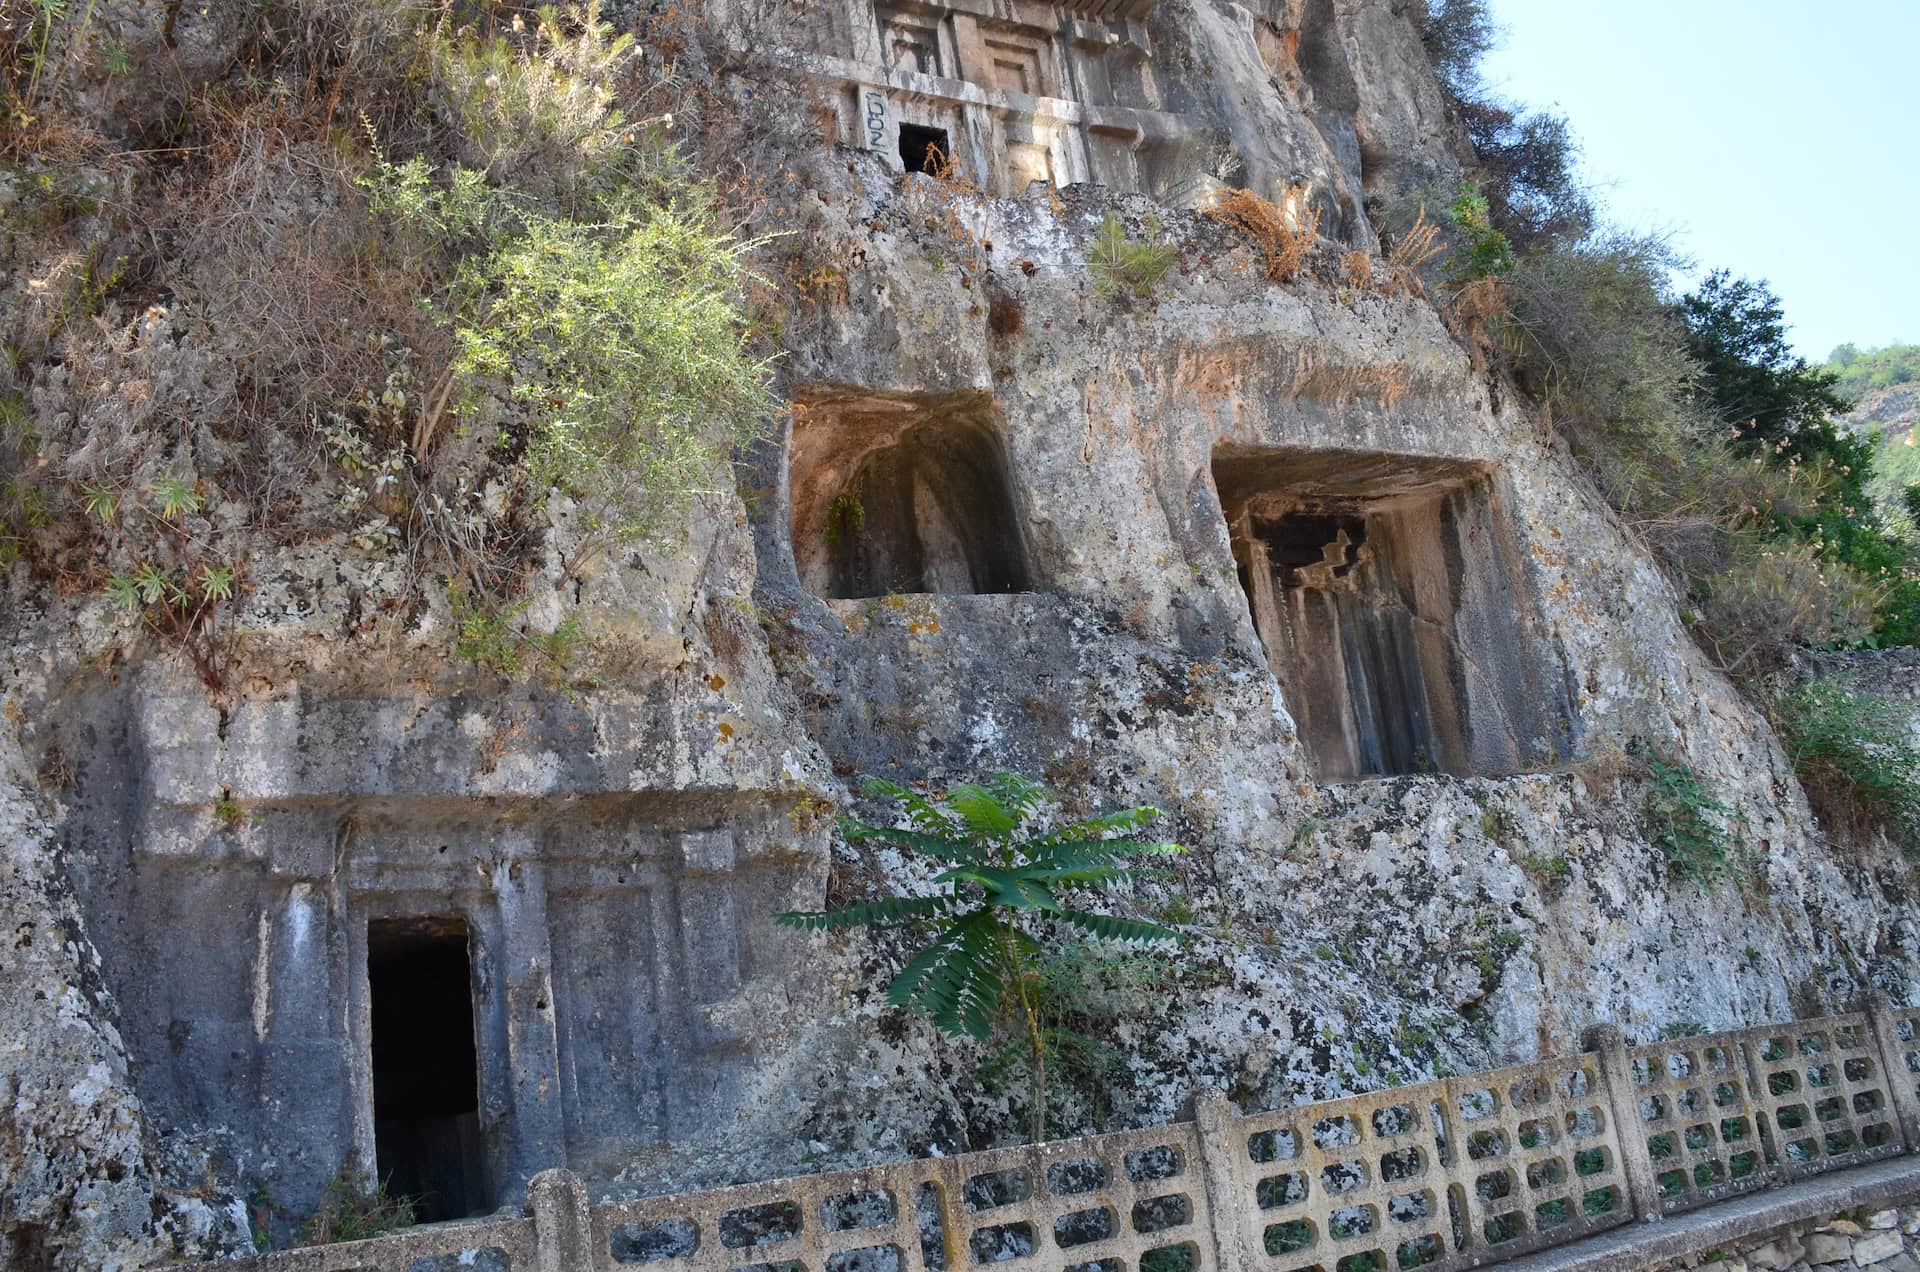 Tombs to the right of the entrance at the Amyntas Rock Tombs in Fethiye, Turkey